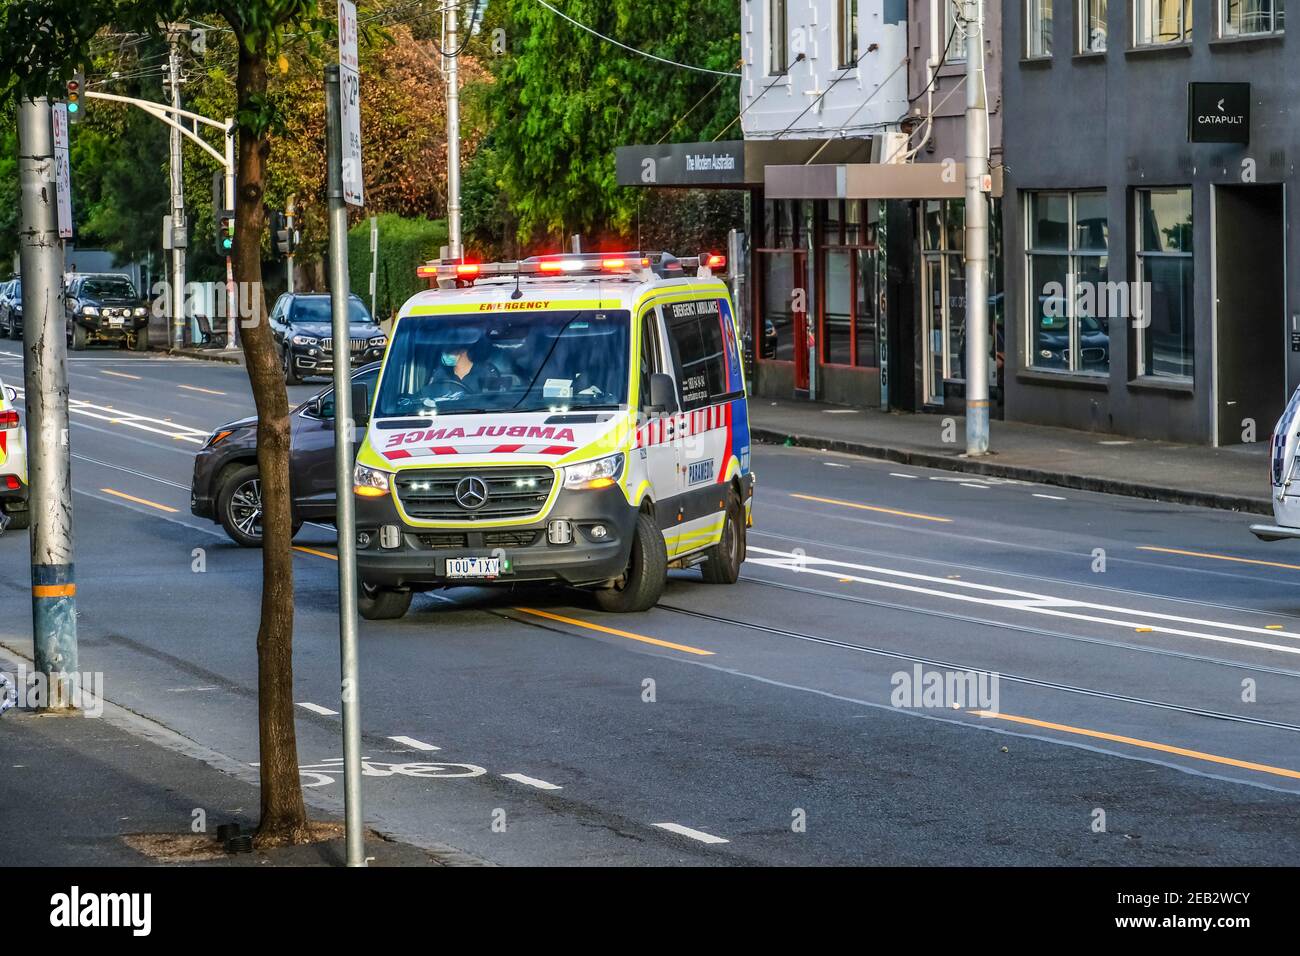 An ambulance with the offender is seen leaving the crime scene along the High Street An incident in Melbourne's inner suburb Prahran triggered a major police response involving Special Operation Group and a dozen of police officers, responding to a young man hurling stones onto the road from awing of an apartment building. A damage of property and street covered with stones and debris stopped Thursday morning traffic for an hour and a half. After a long negotiation with the police the offender gave himself up to the police and he was taken by ambulance to treat his cuts and other injuries. Stock Photo